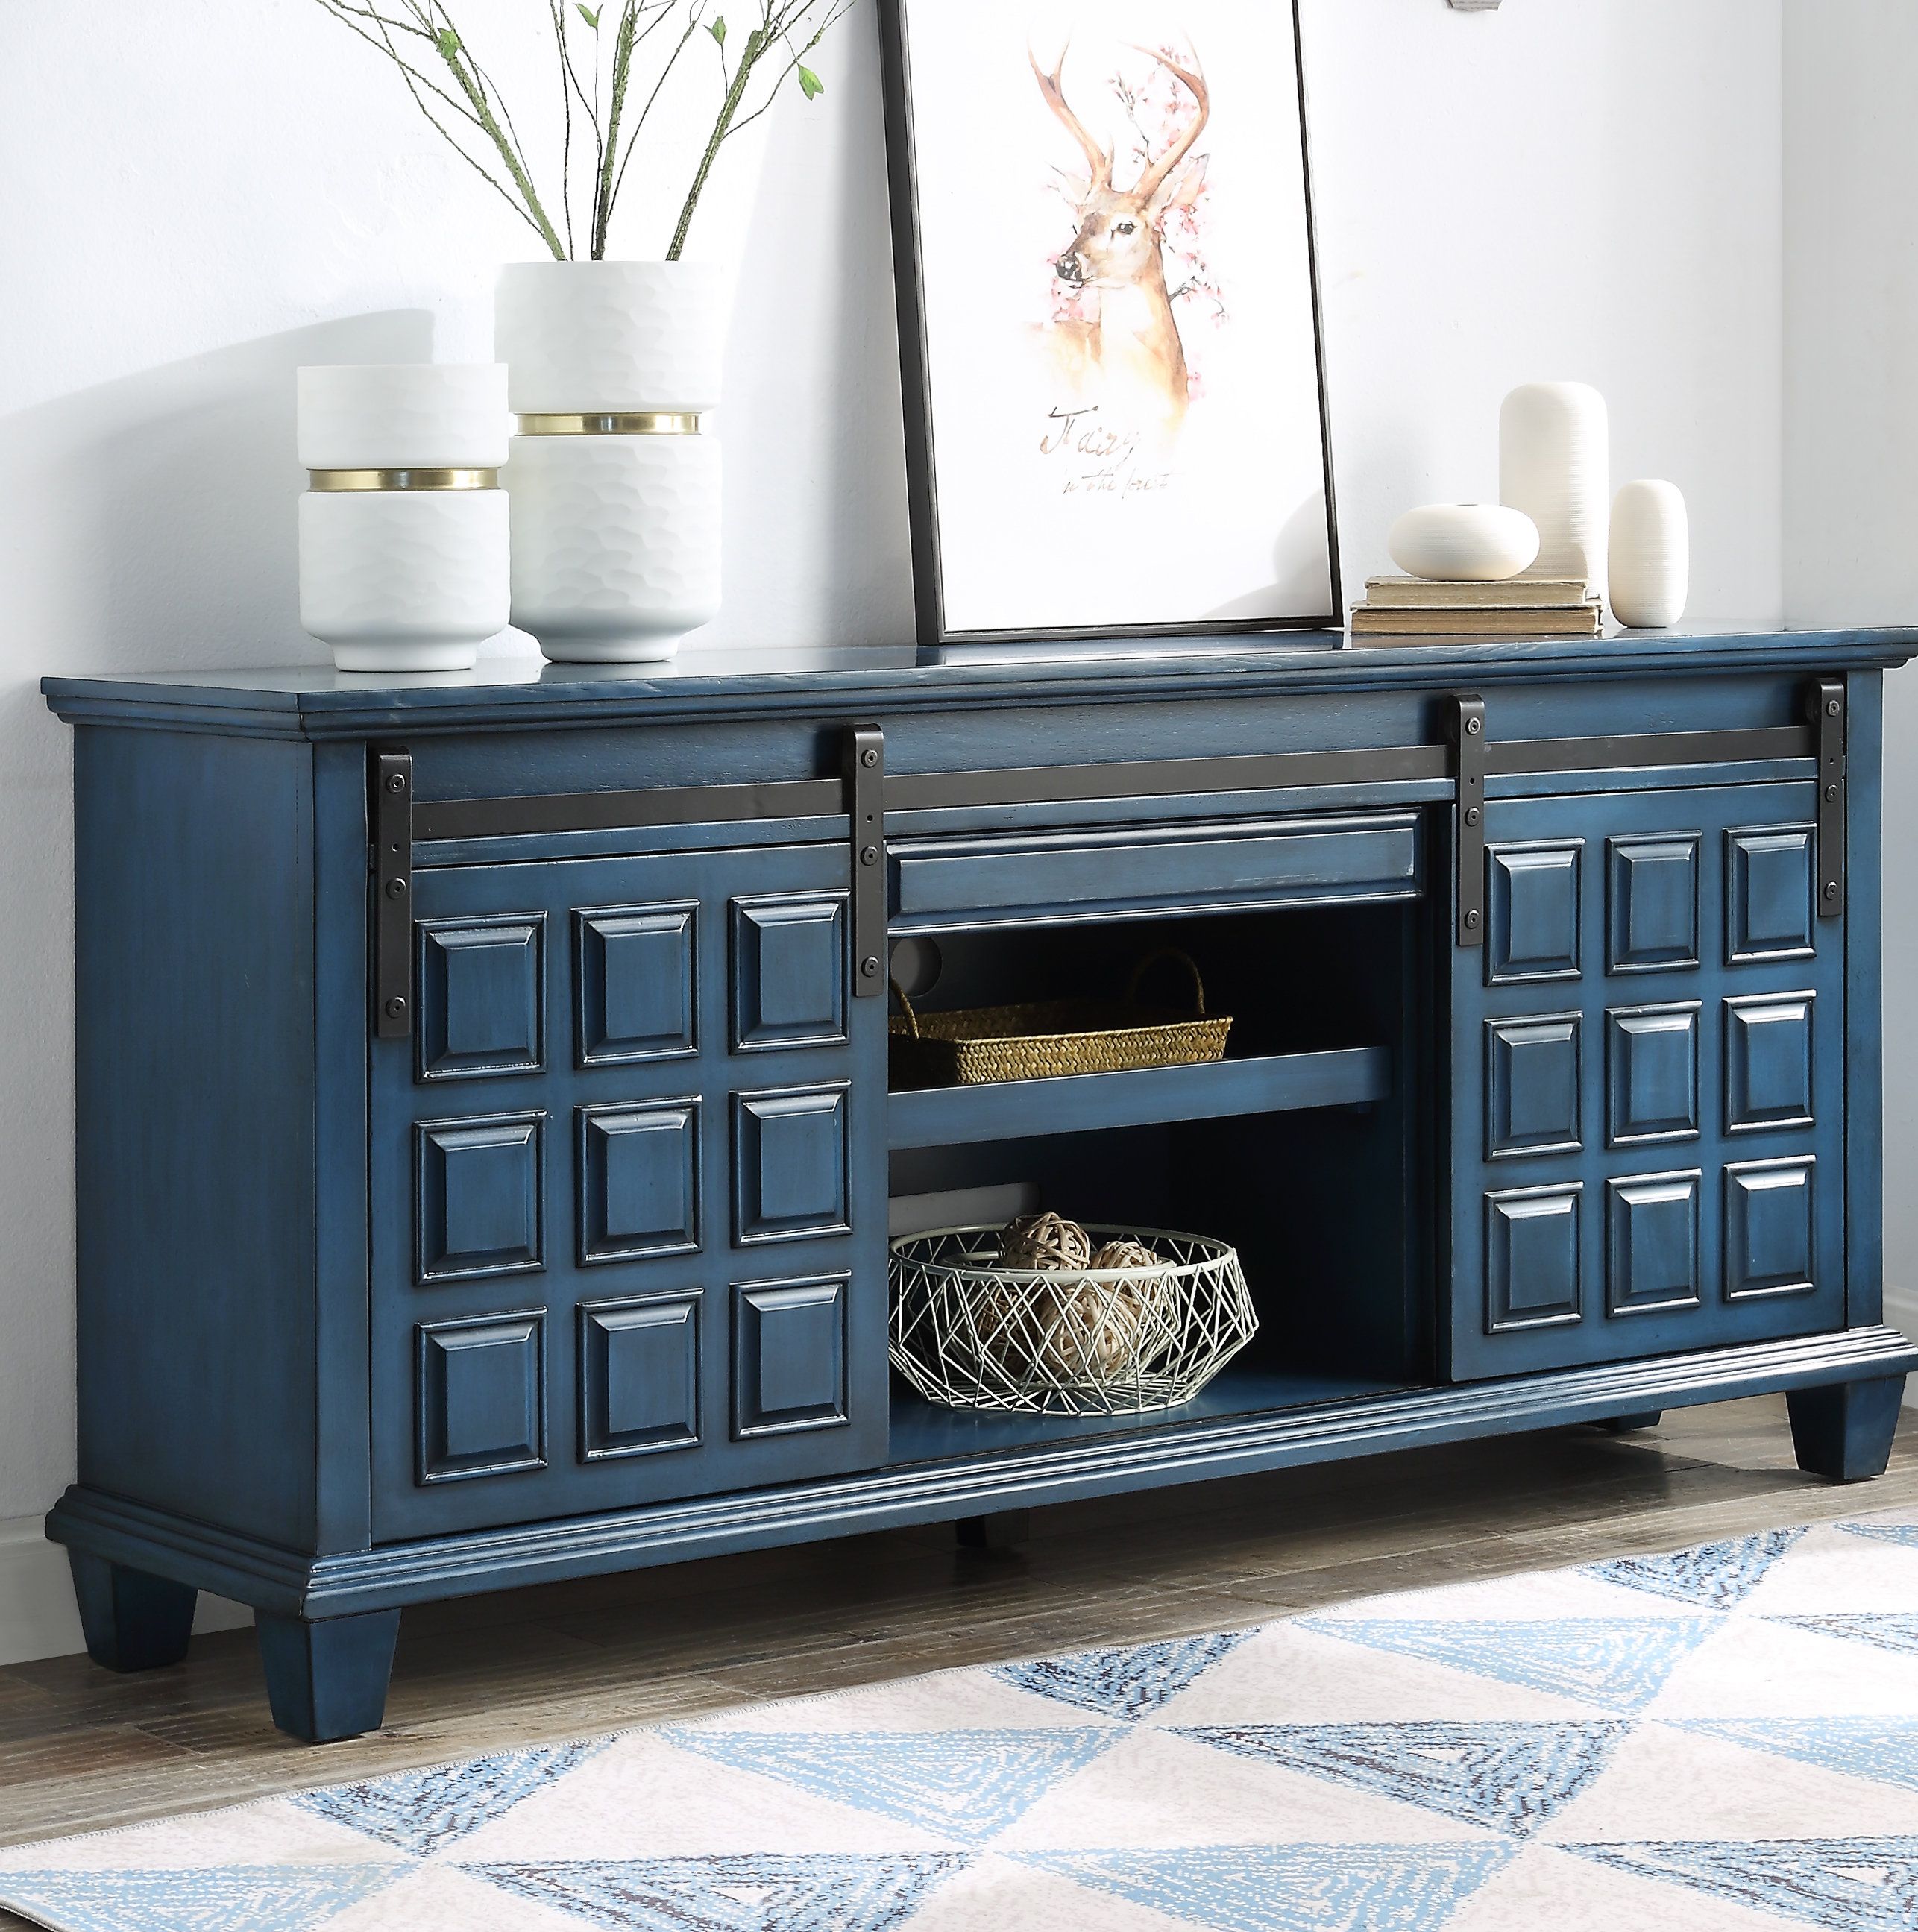 Hallway Credenza | Wayfair Throughout Most Up To Date Deana Credenzas (View 9 of 20)